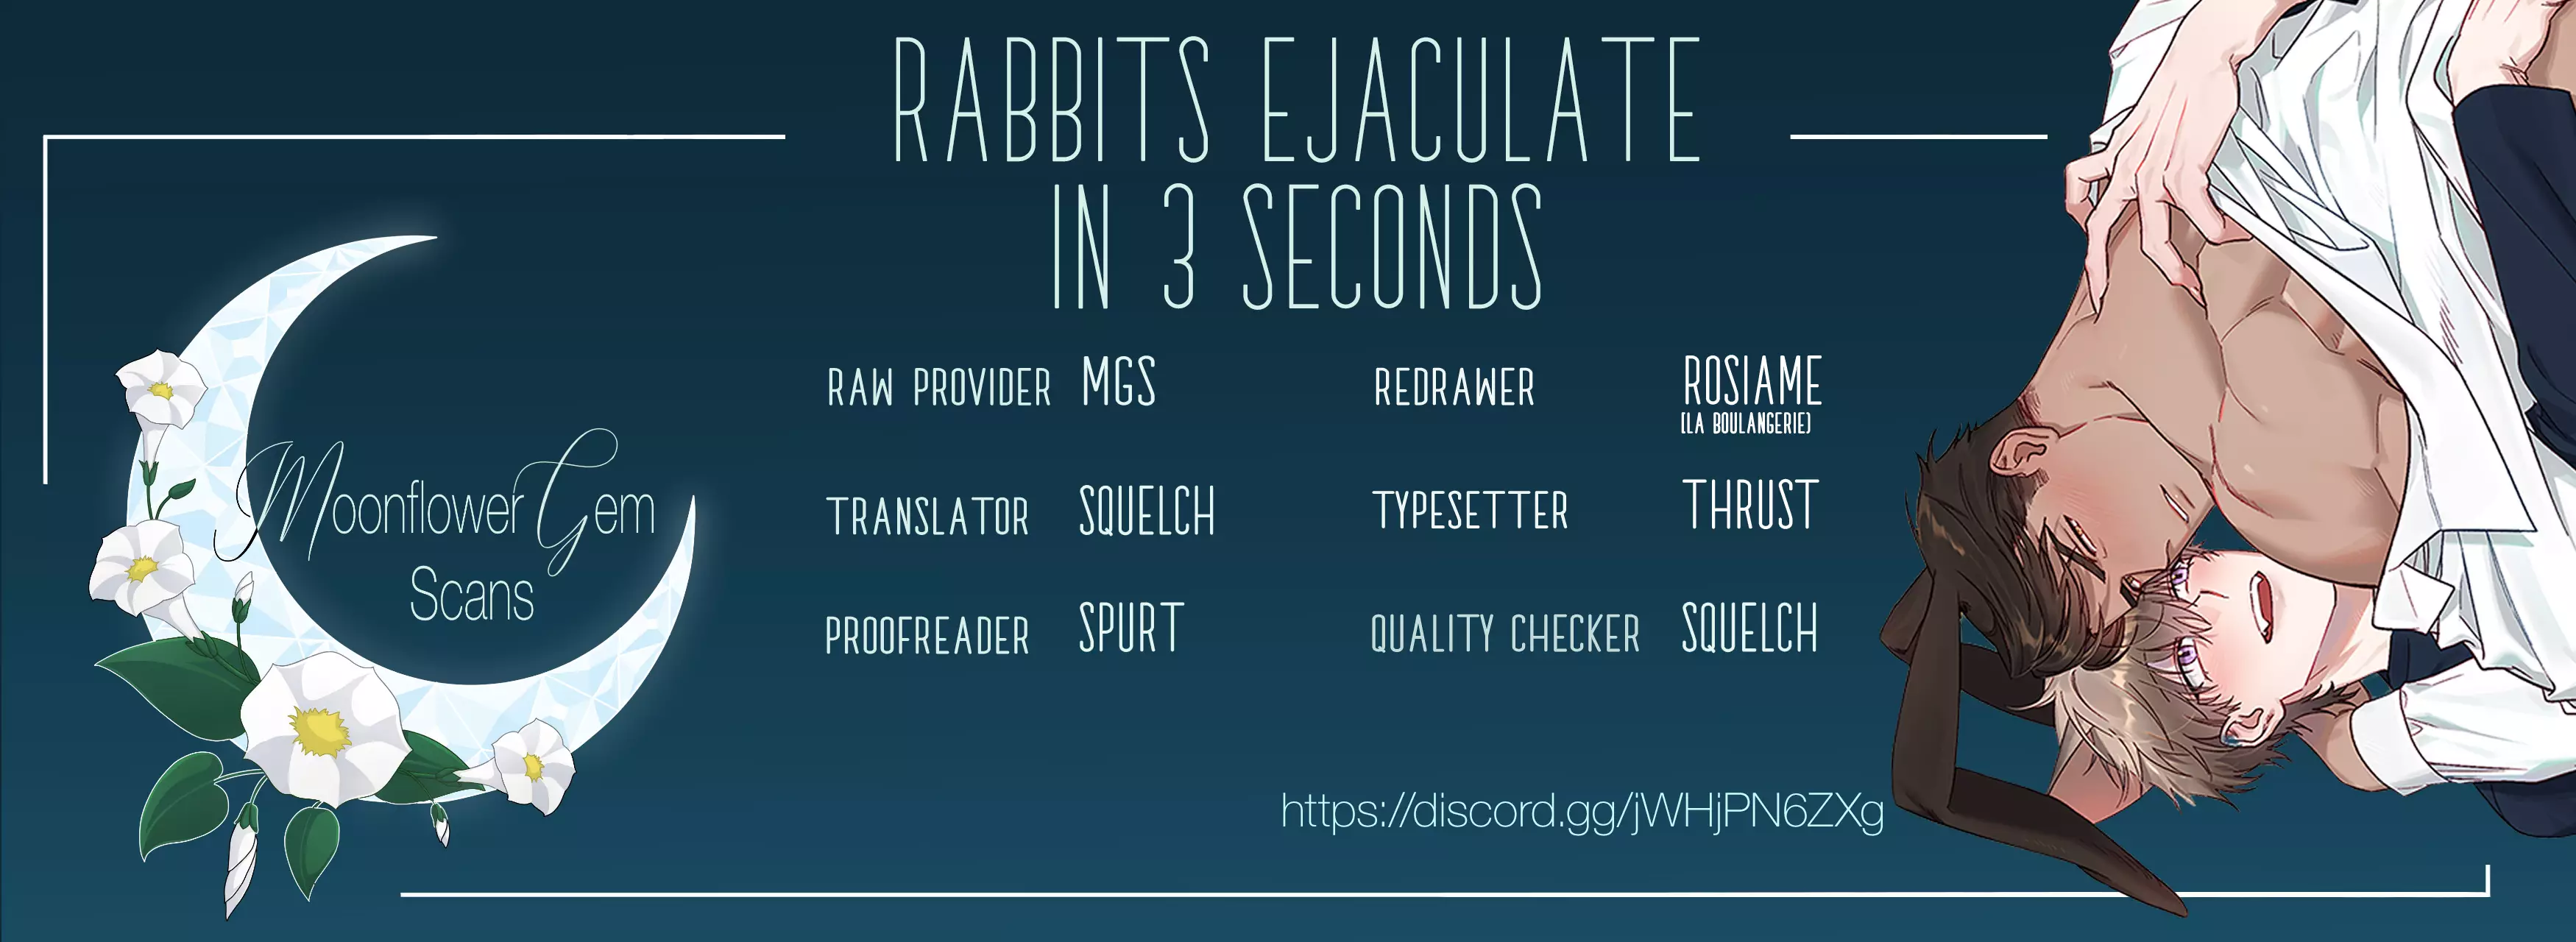 Rabbits Ejaculate In 3 Seconds - 7.5 page 1-724a8917